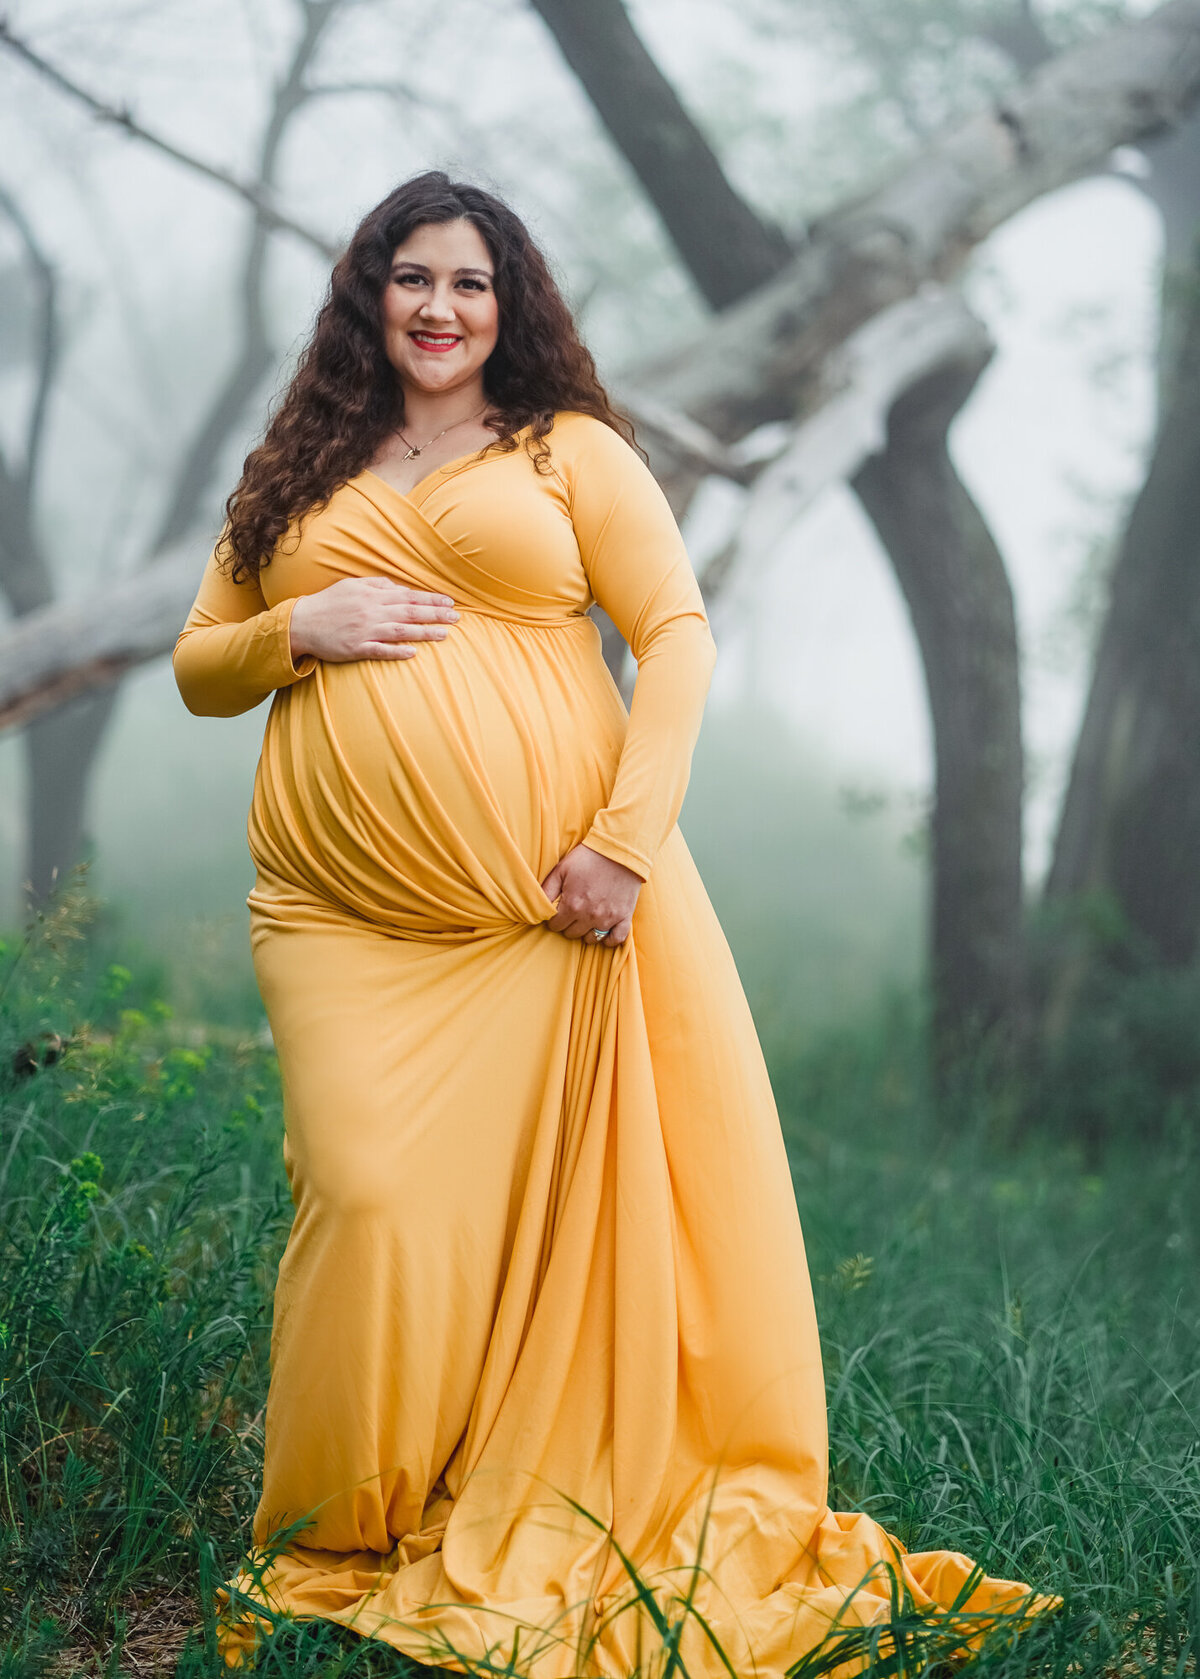 Outdoor Maternity photo with trees and mist custom dress